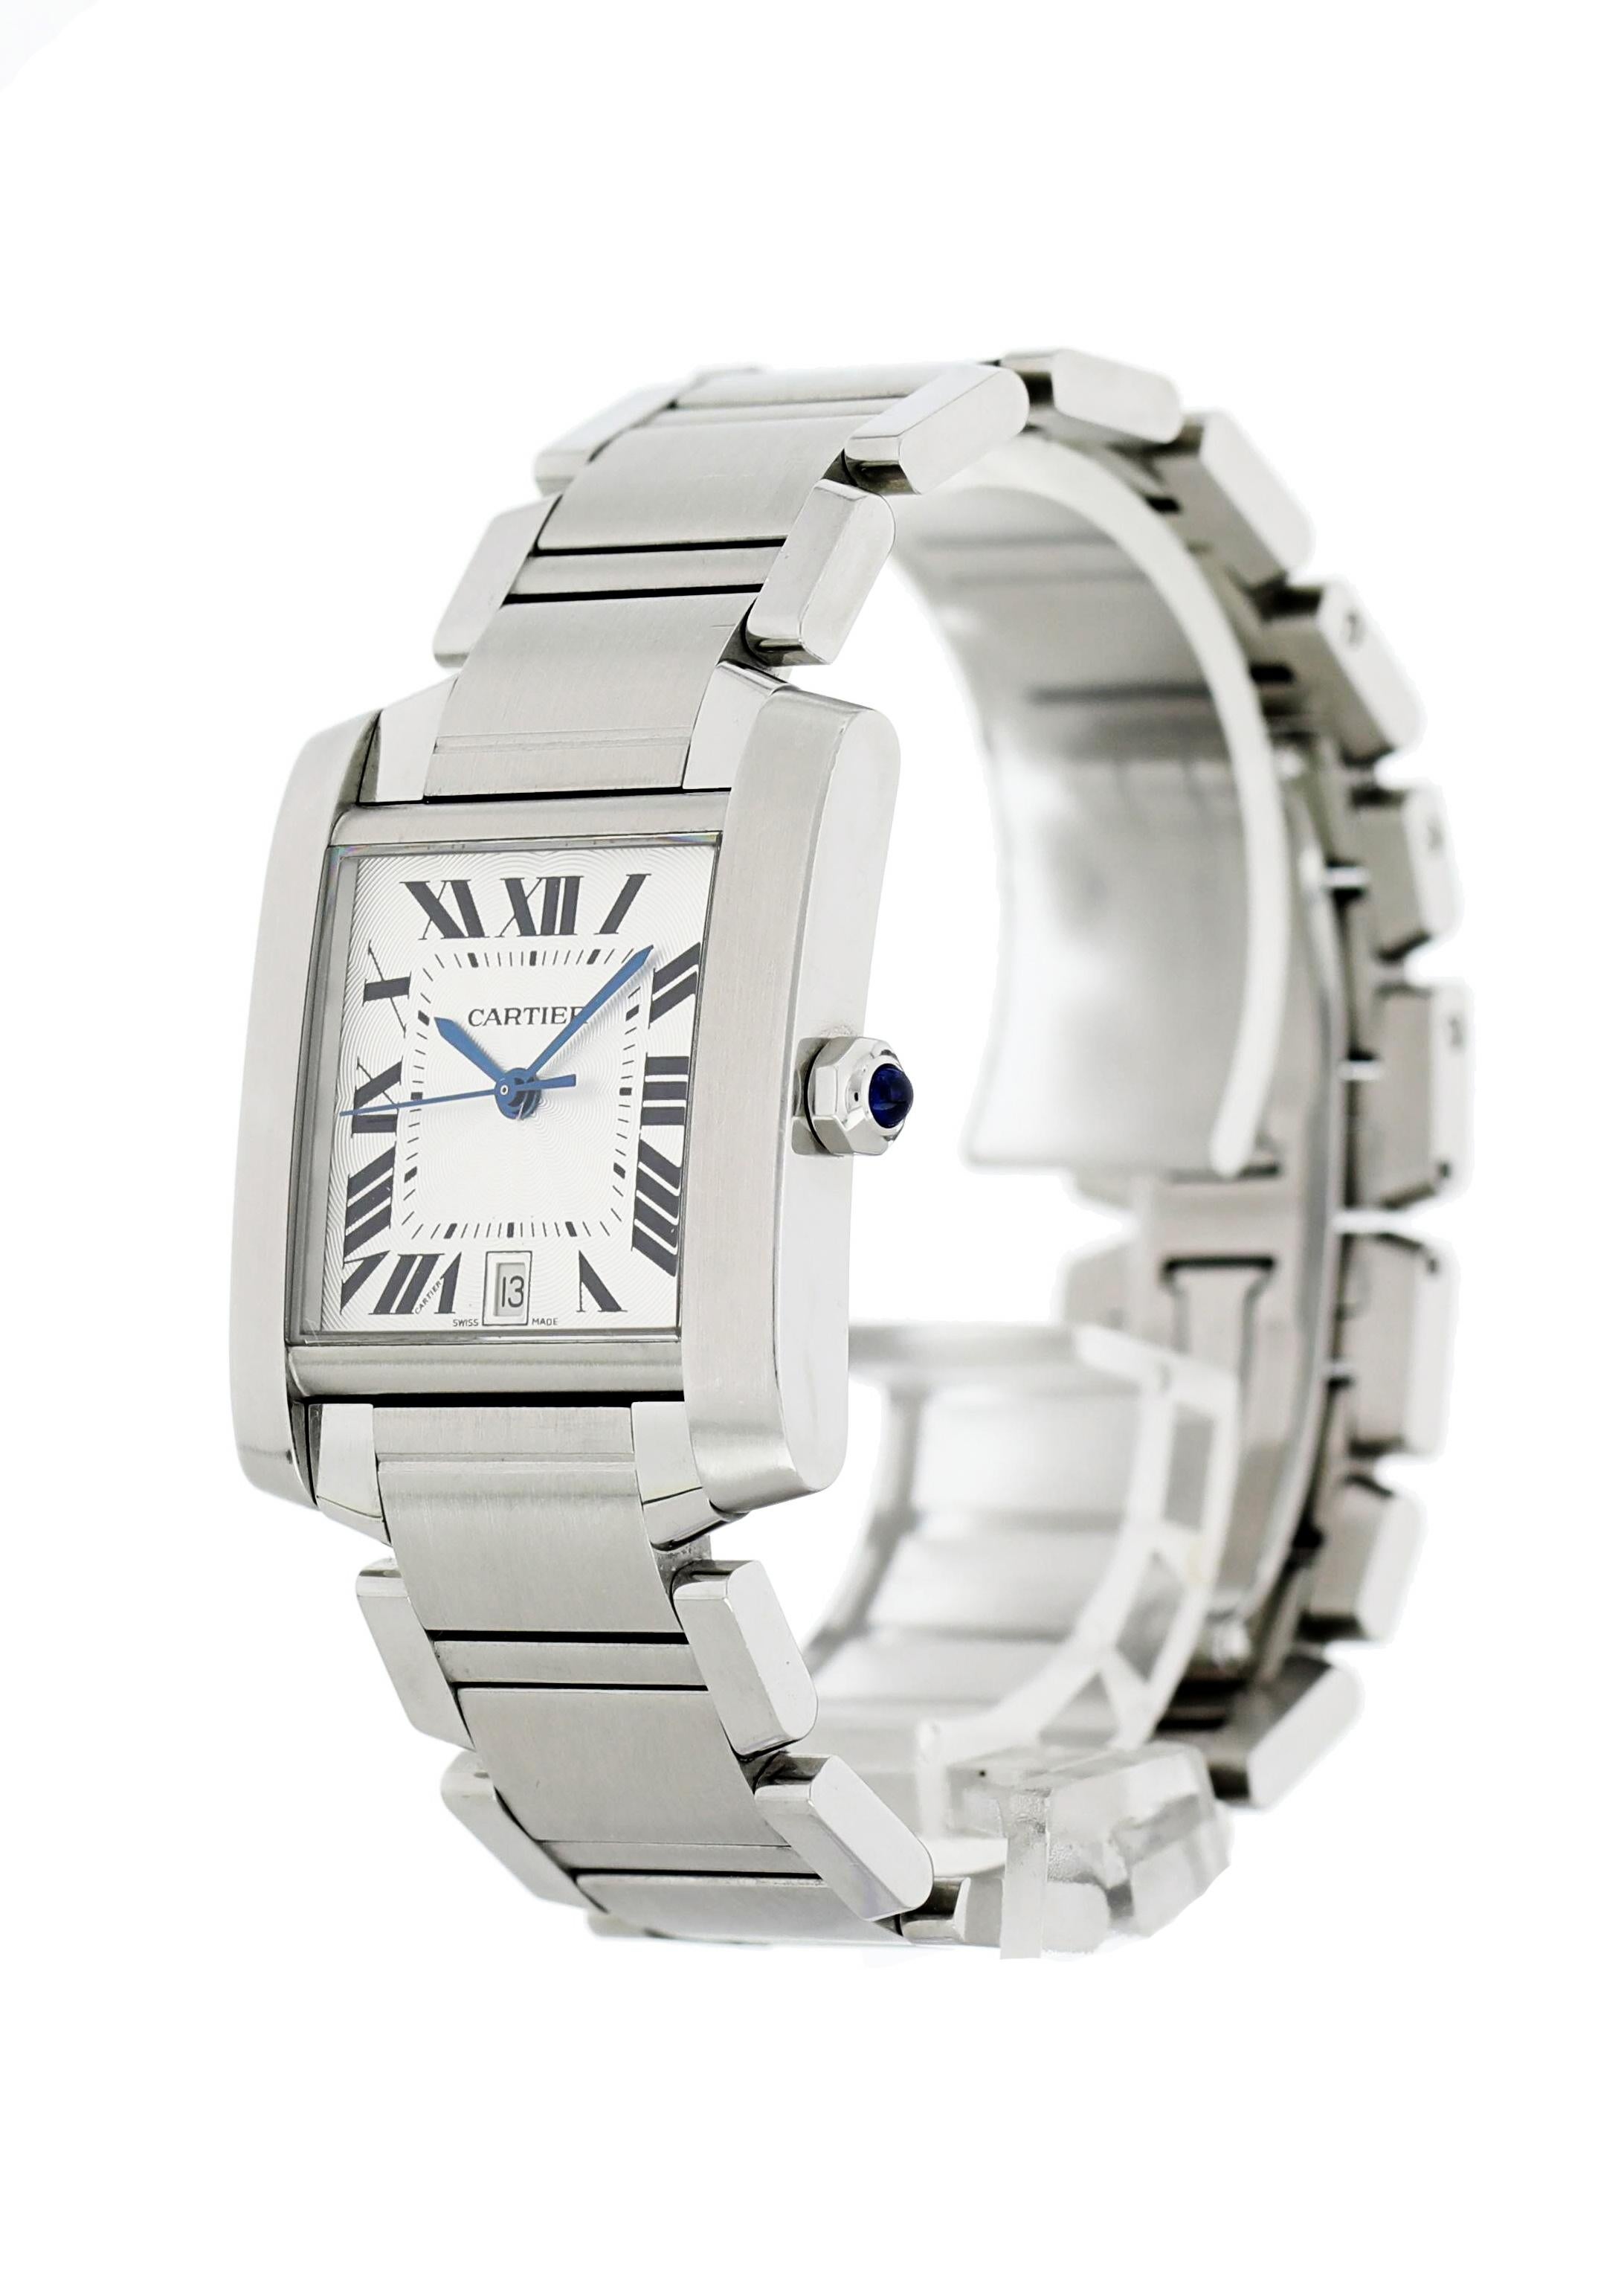 Cartier Tank Francaise 2302 Mens Watch. 
28mm stainless steel case with a fixed smooth bezel. 
Silver dial blue steel hands and black Roman numerals hour markers. 
Minute marker on the inner dial. 
Date display at the 6 o'clock position. 
Stainless